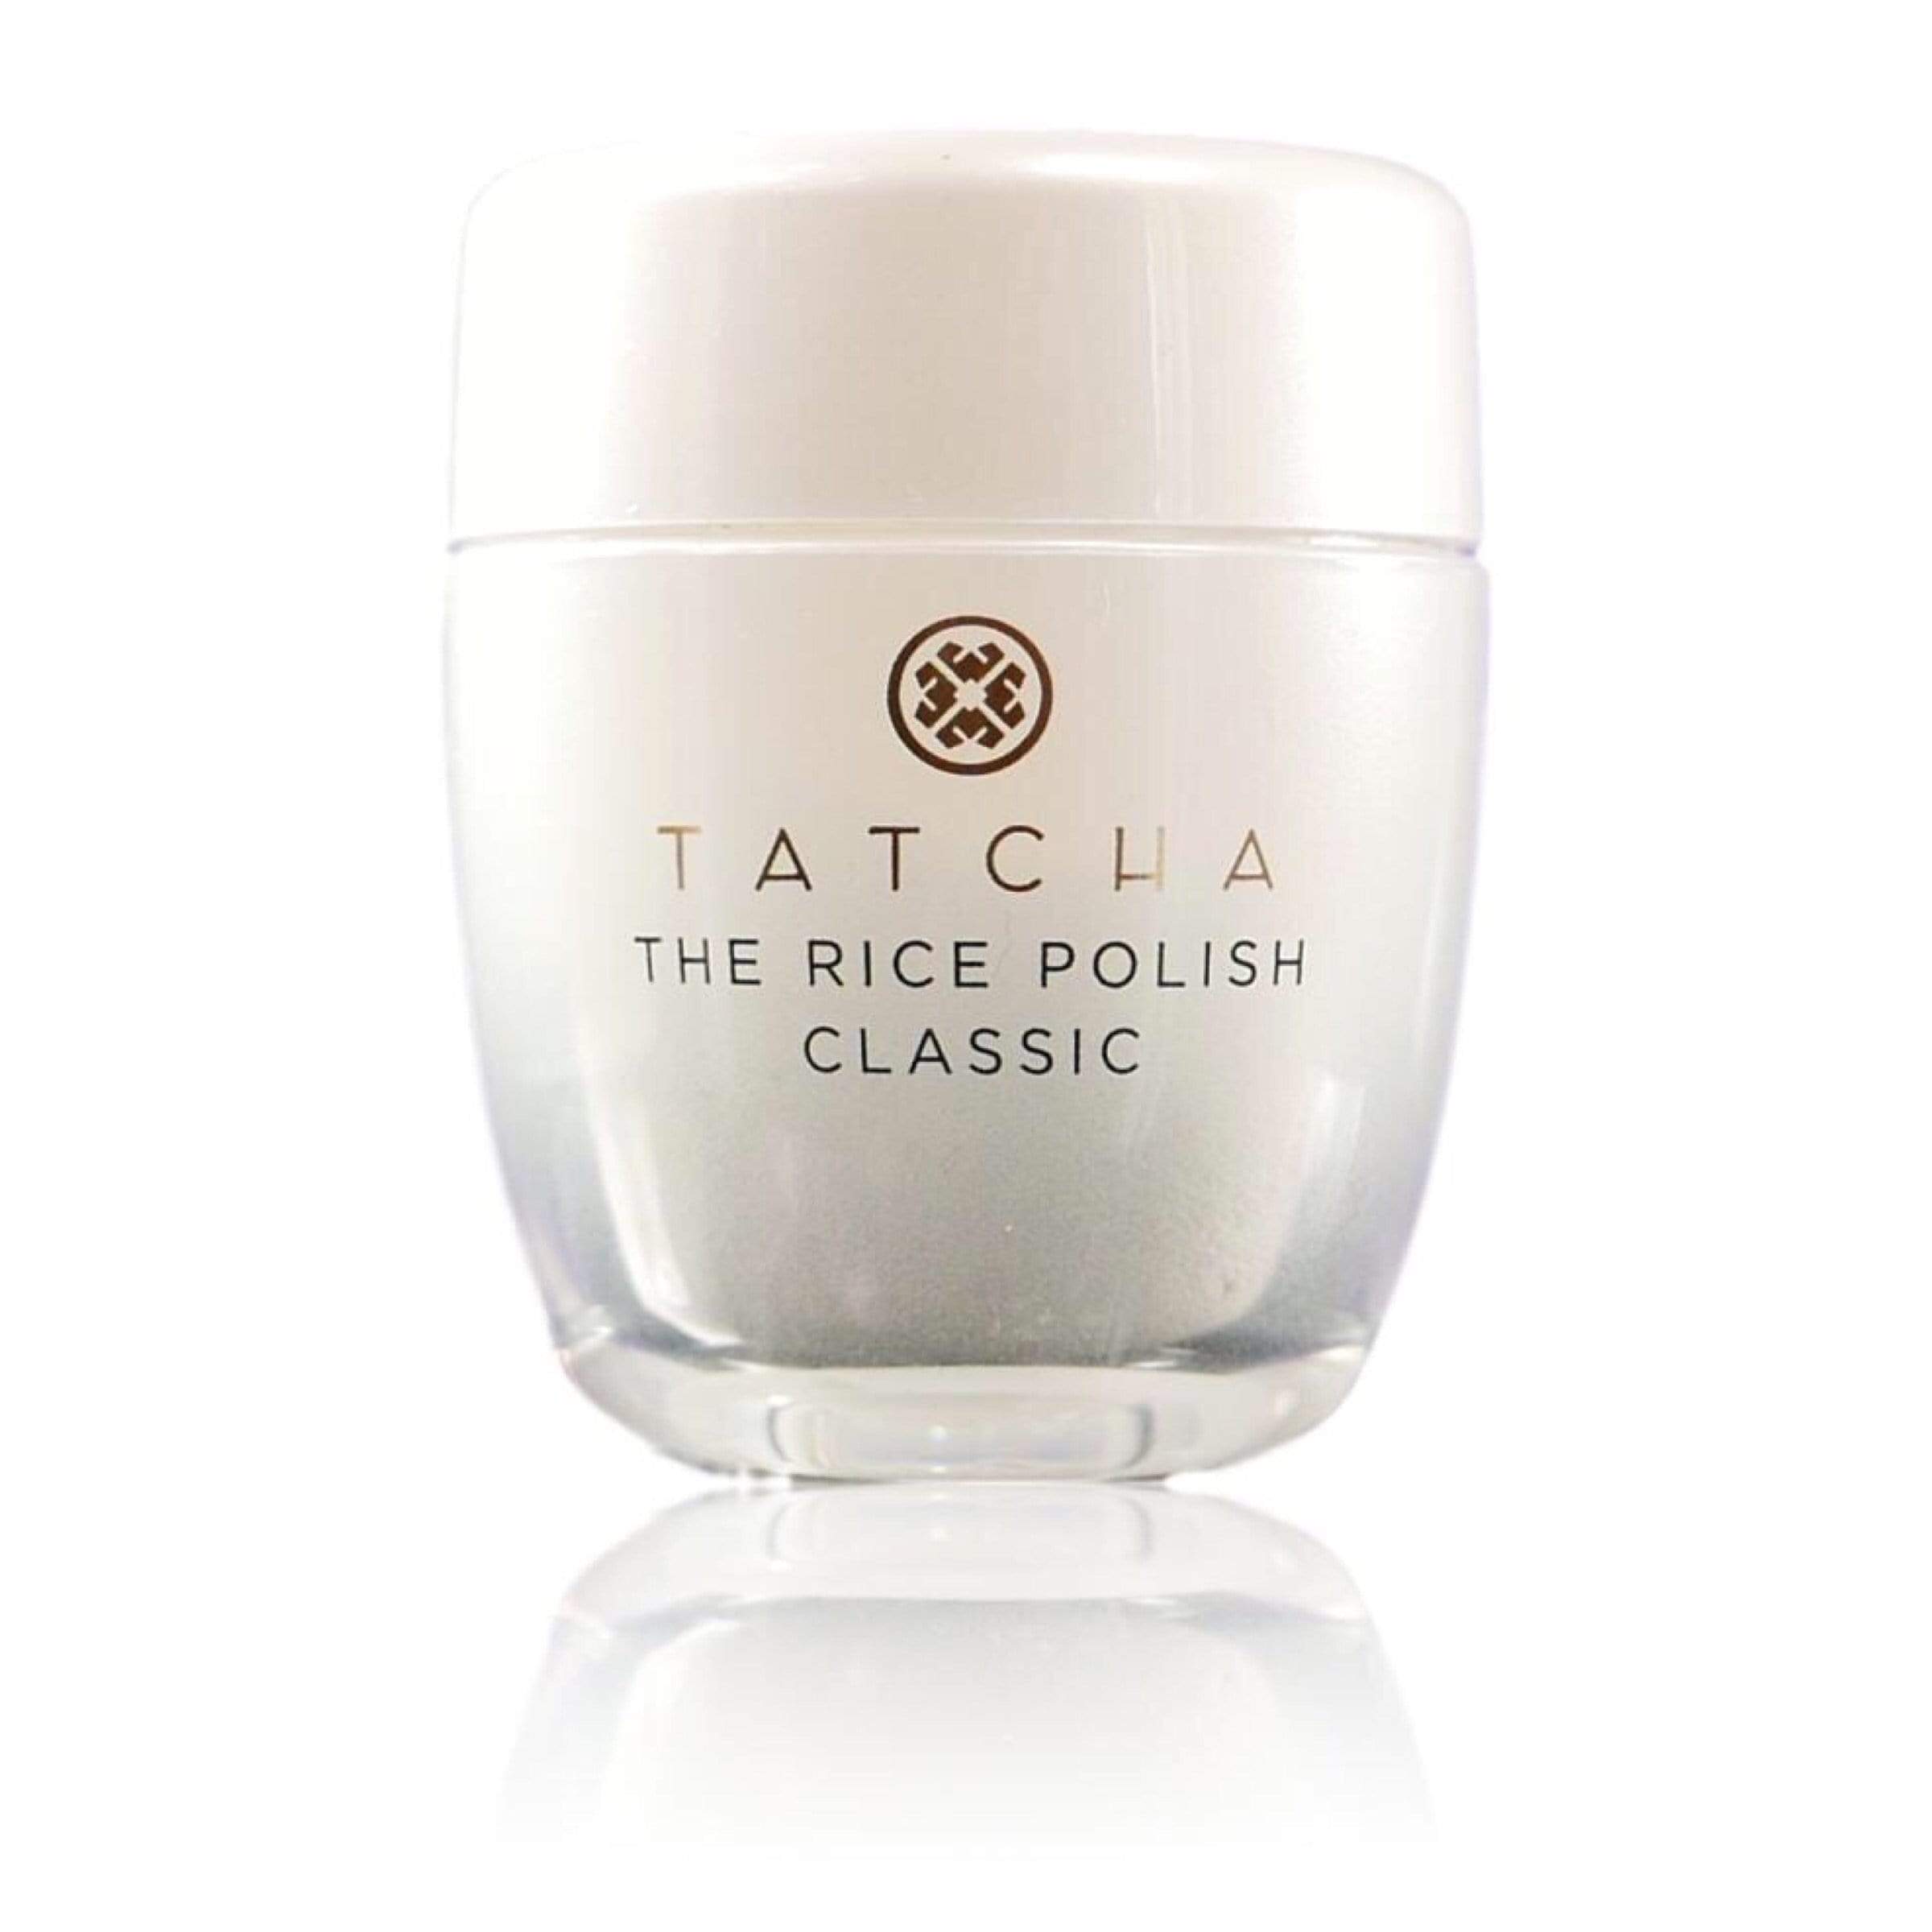 Tatcha The Rice Polish - Classic Foaming Enzyme Powder Travel Size - Normal to Dry, 0.35oz | 10g, Skin Care, London Loves Beauty